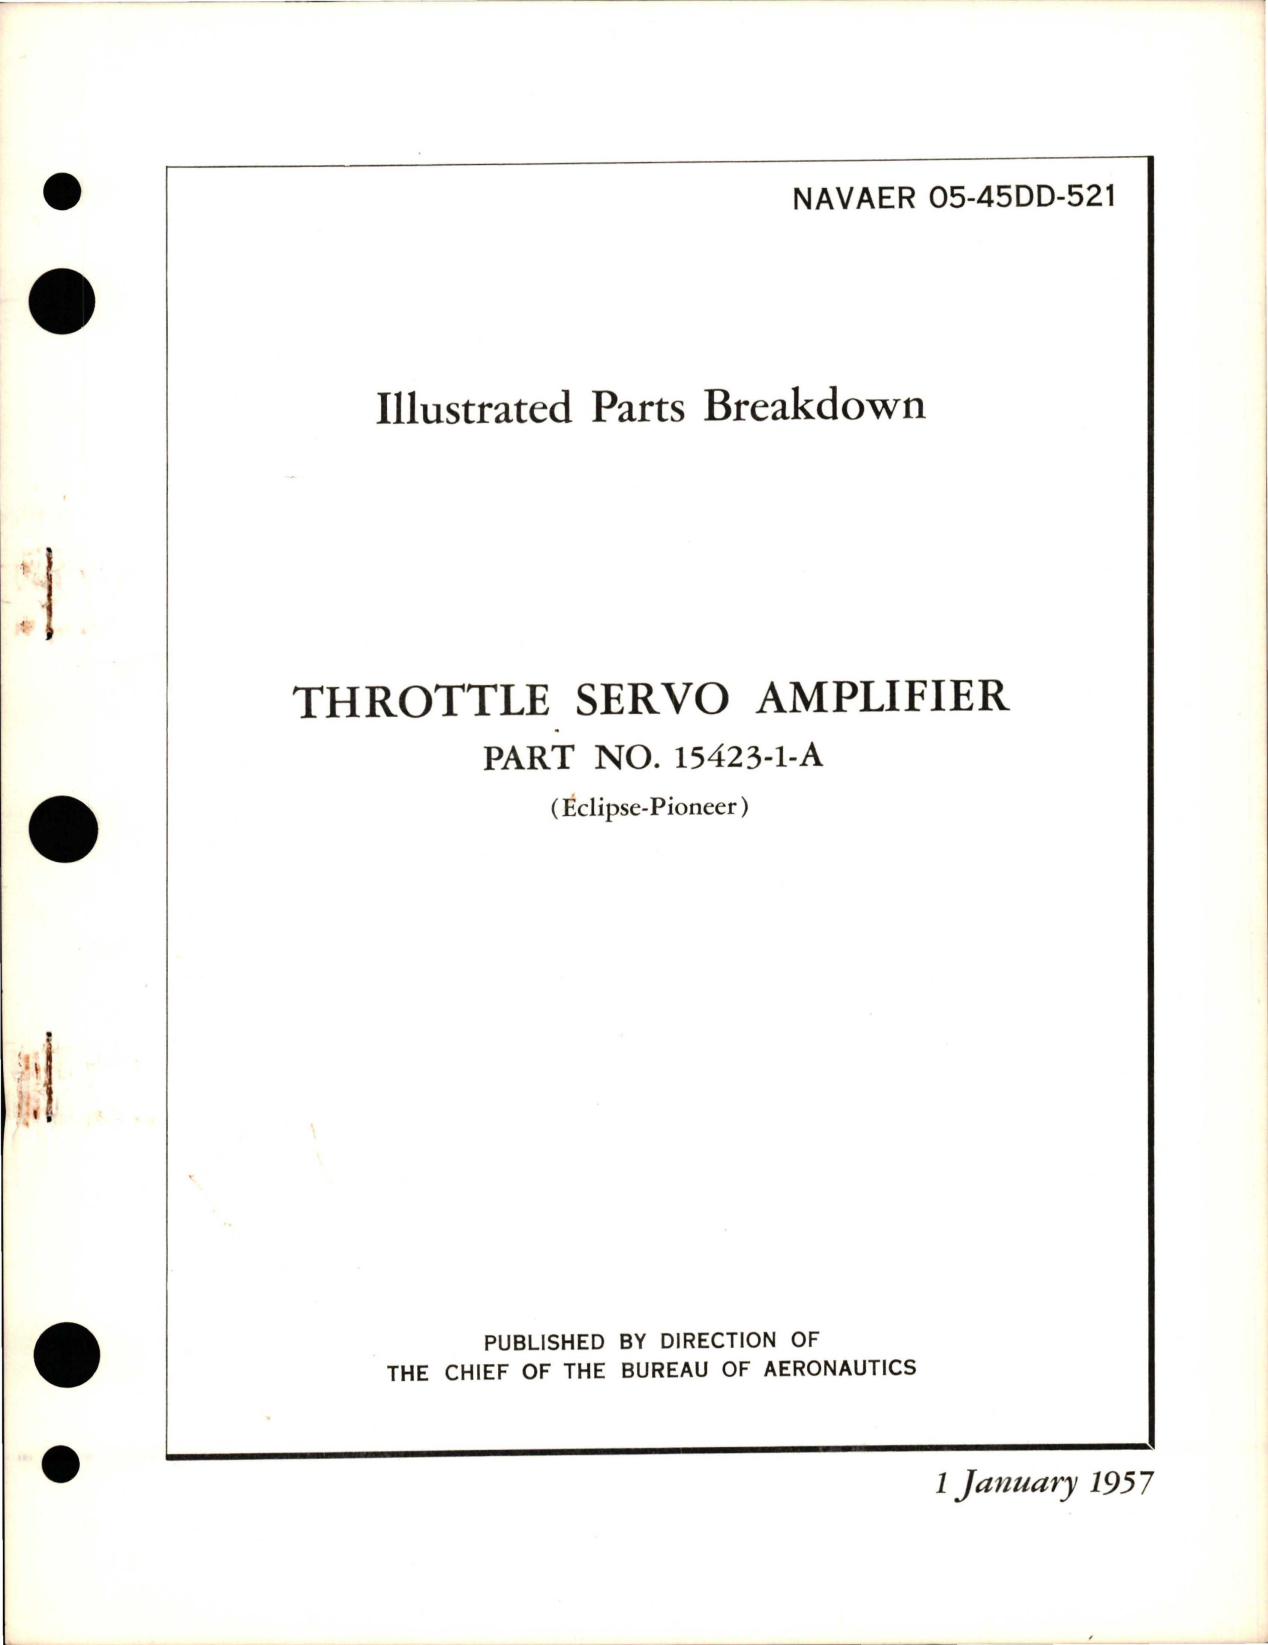 Sample page 1 from AirCorps Library document: Illustrated Parts Breakdown for Throttle Servo Amplifier - Part 15423-1-A 